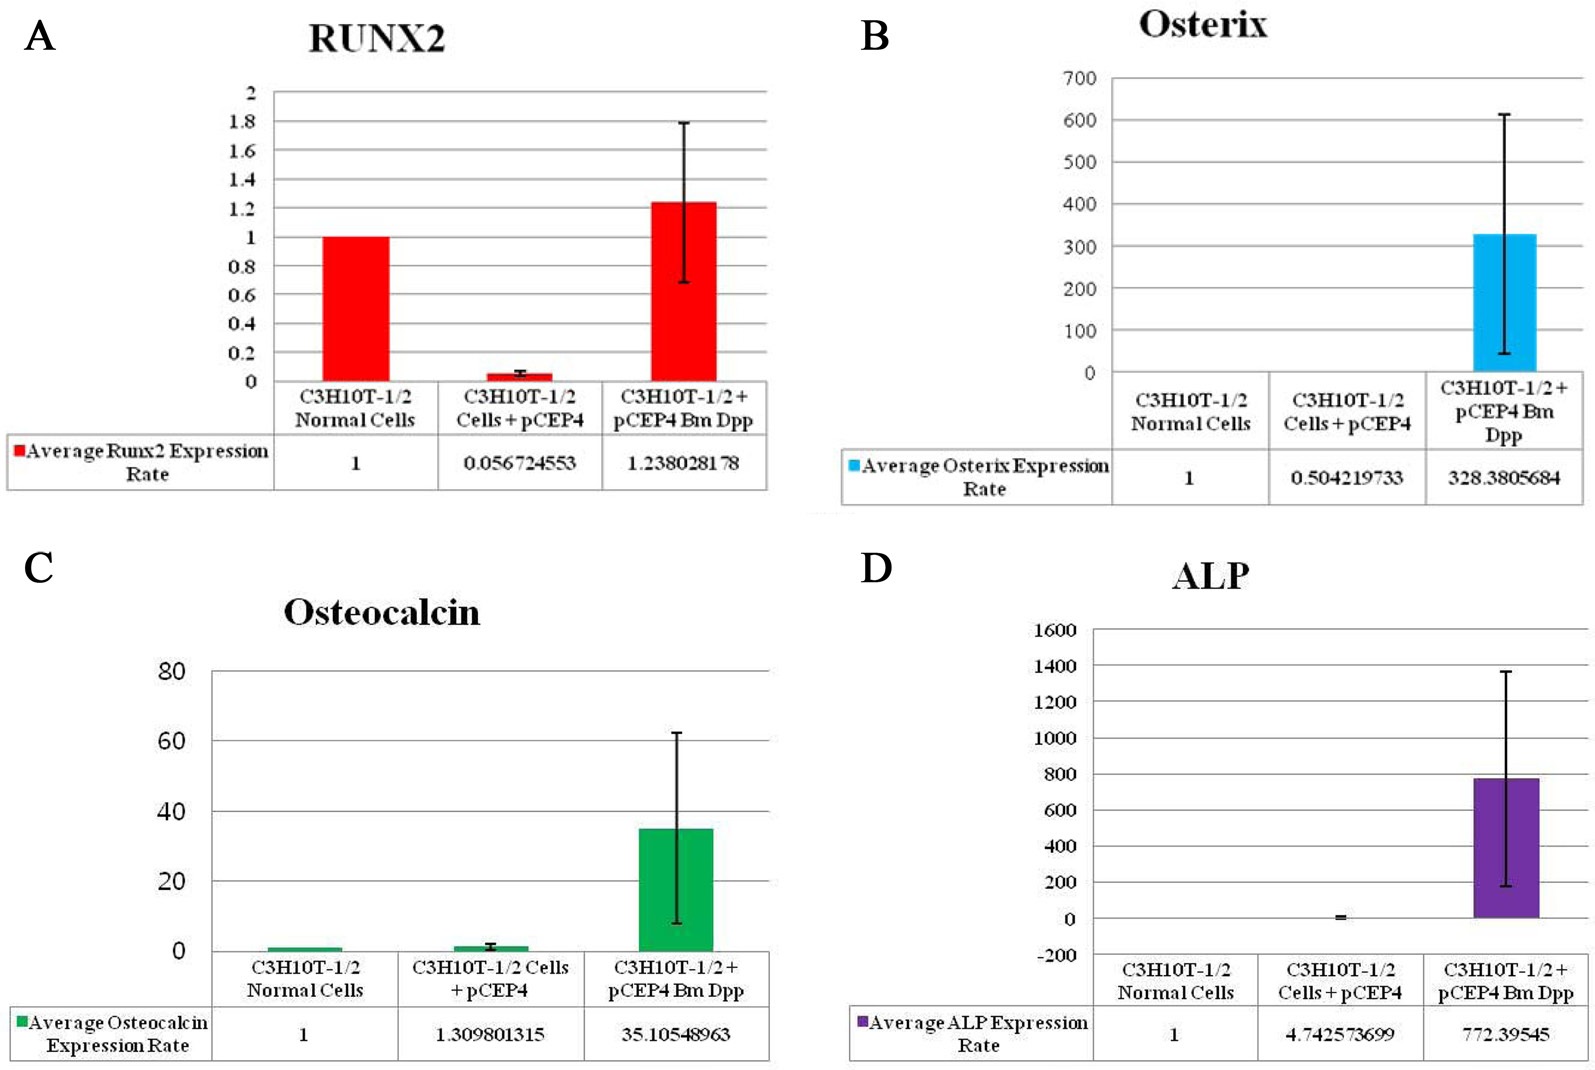 Quantitative Real-Time RT-PCR analysis of 4 osteogenic differentiation marker genes. To validate the observed osteoblast-specific
differentiation effects, we performed qRT-PCR. Expressions of 4 osteogenic differentiation marker genes were normalized to the expression
levels of the endogenous mouse GAPDH gene as an internal reference. The mRNA expression rate for each osteogenic differentiation marker
gene in the target cells was calculated. The relative mRNA expression rate of RUNX2 (A), osterix (B), osteocalcin (C), and ALP (D) were
compared with the rates in control cells and HygB-resistant cells transfected with the pCEP4 plasmid.